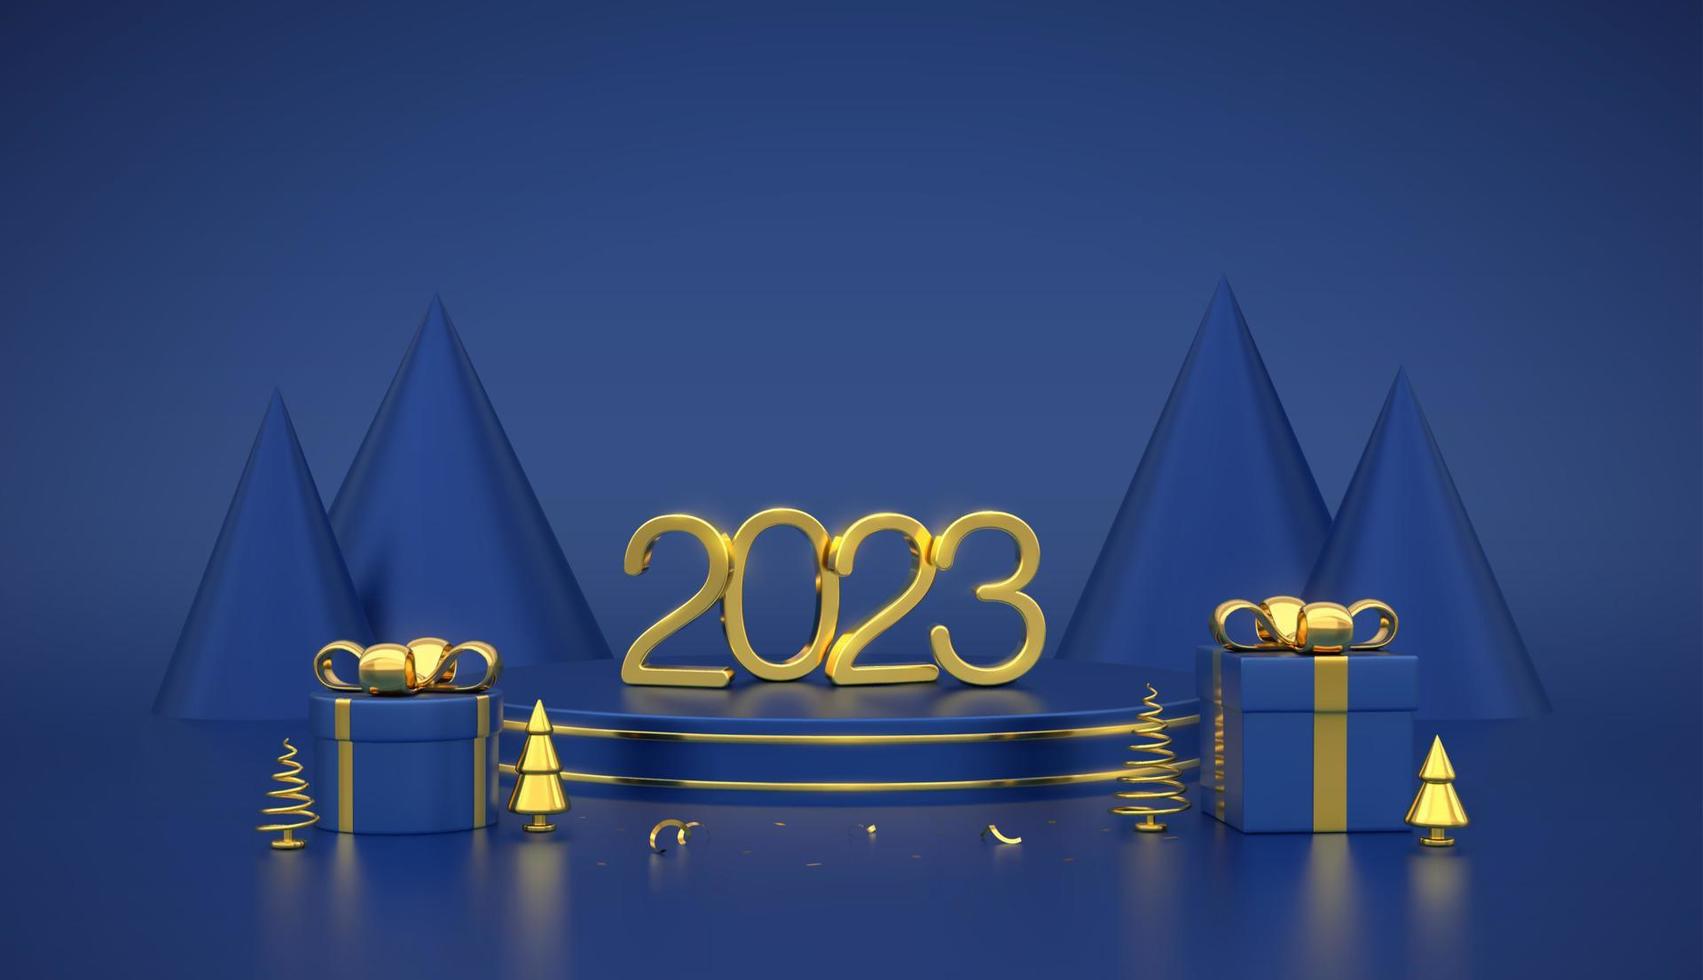 Happy New 2023 Year. 3D Golden metallic numbers 2023 on blue stage podium. Scene, round platform with gift boxes and golden metallic pine, spruce trees on blue background. Vector illustration.